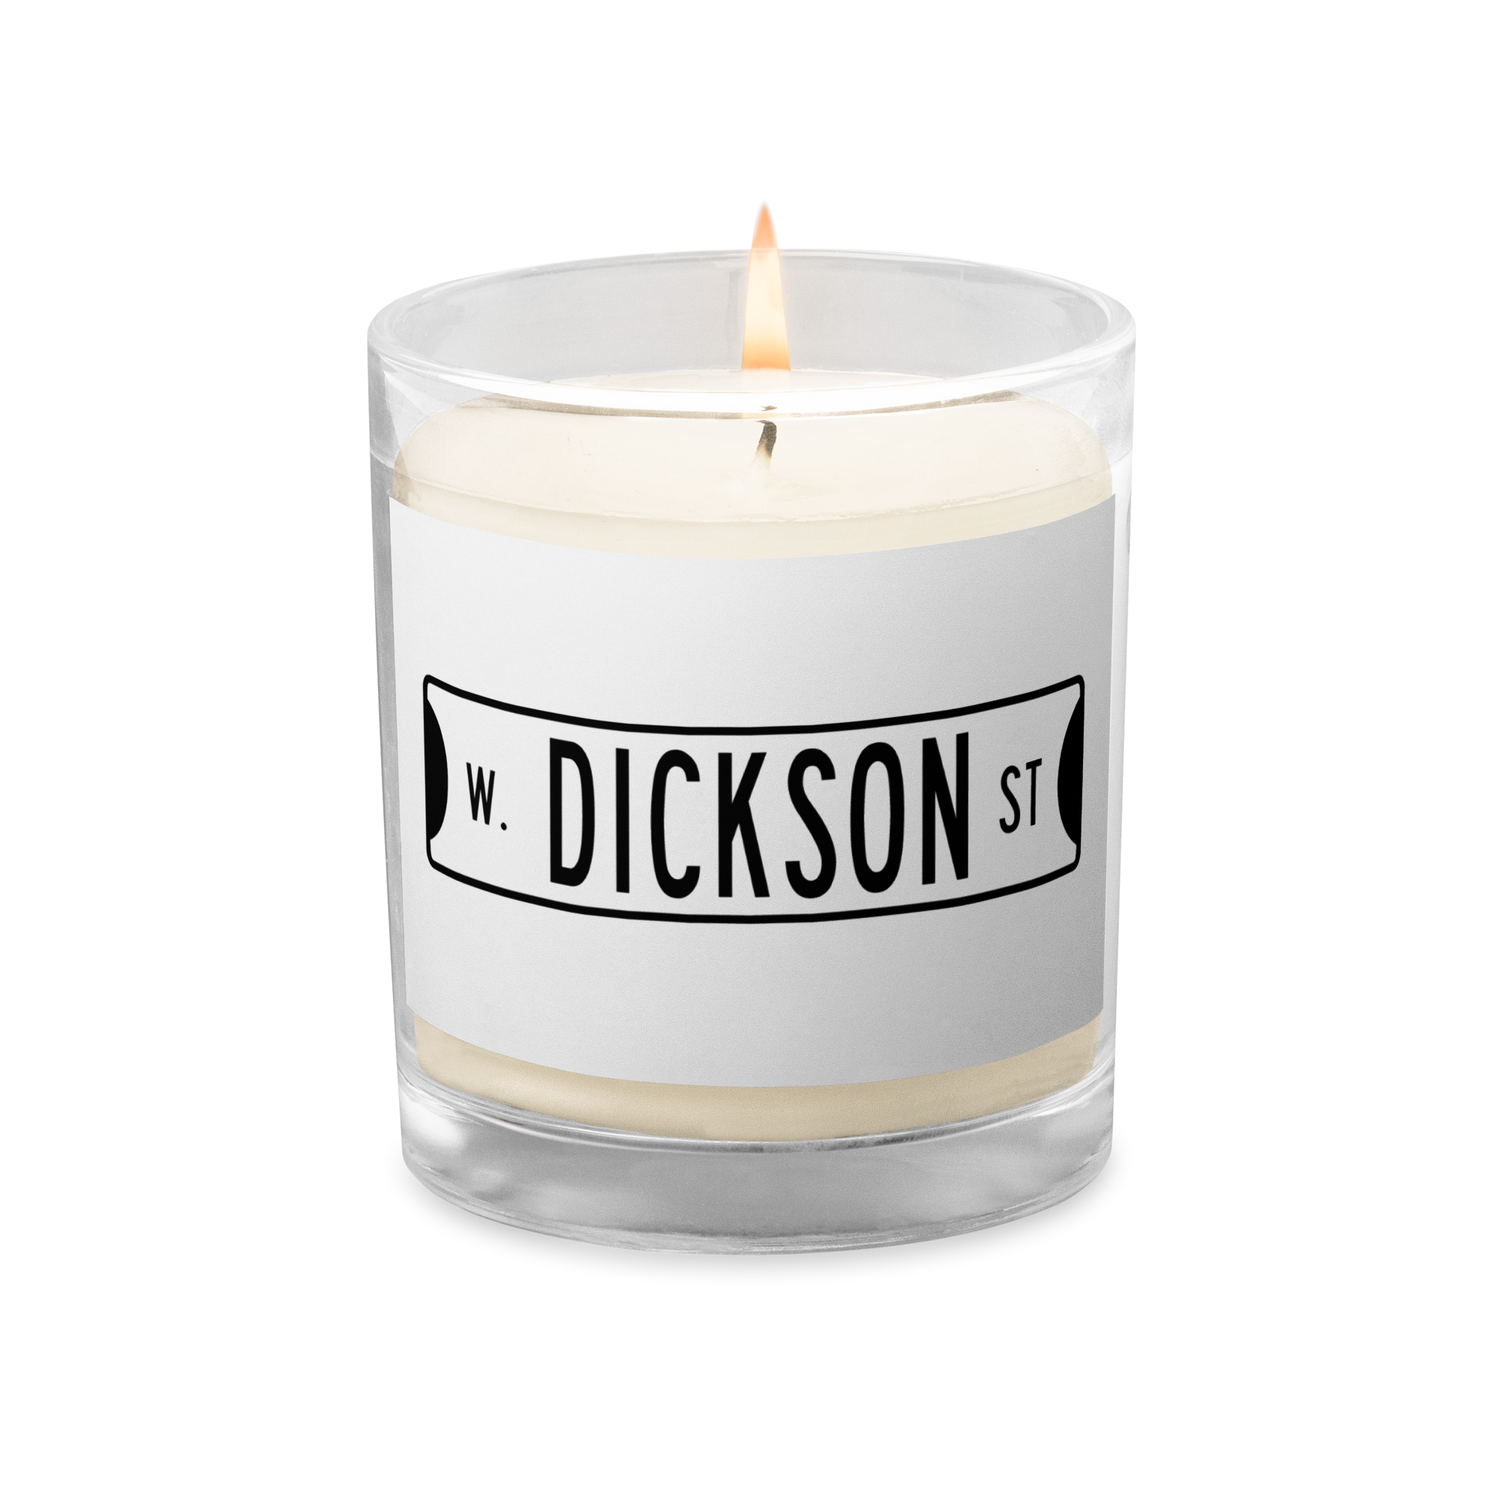 Retro Dickson Street Sign Glass Jar Soy Wax Candle